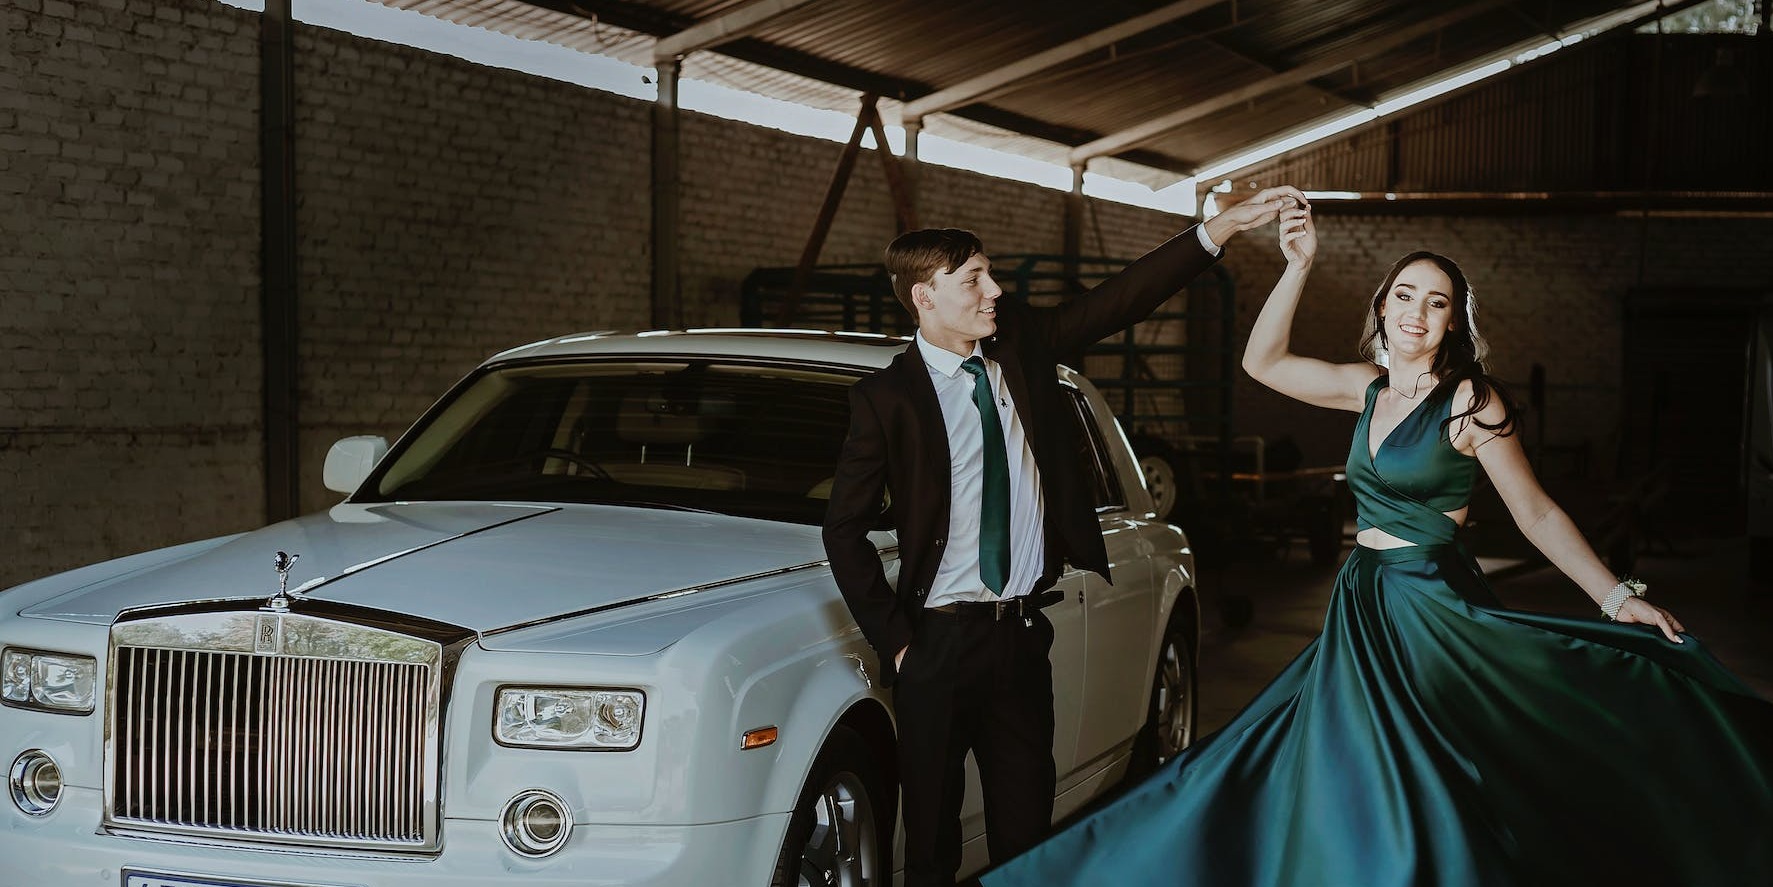 Top Tips for Booking a Limo for Your Prom Night in London